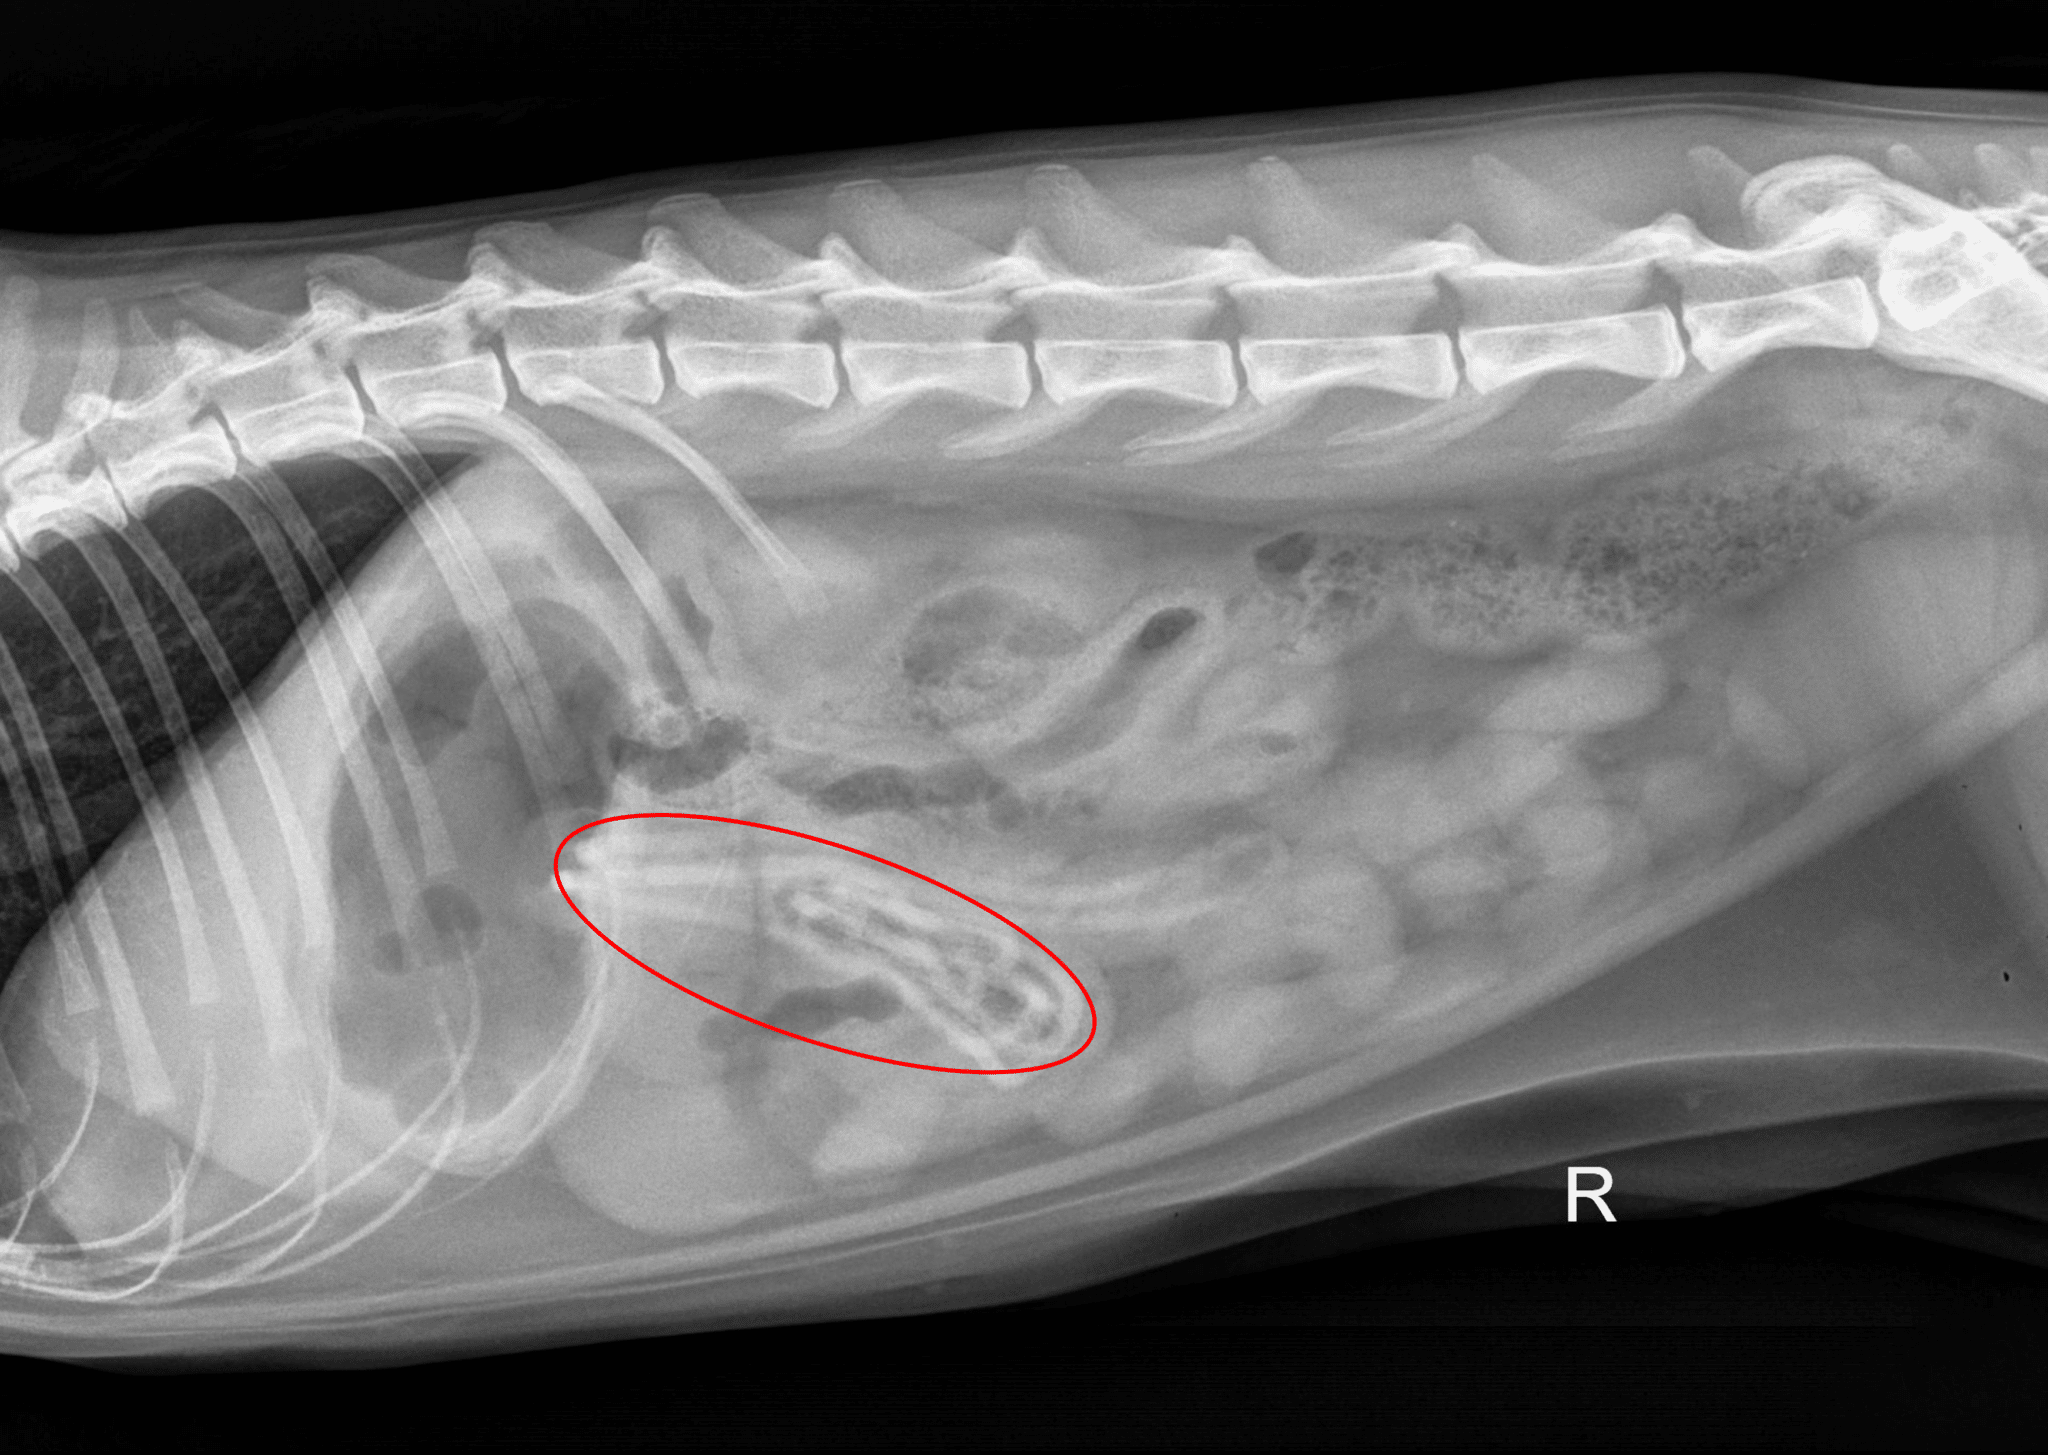 Hair ties shown on an x-ray of a cat's abdomen